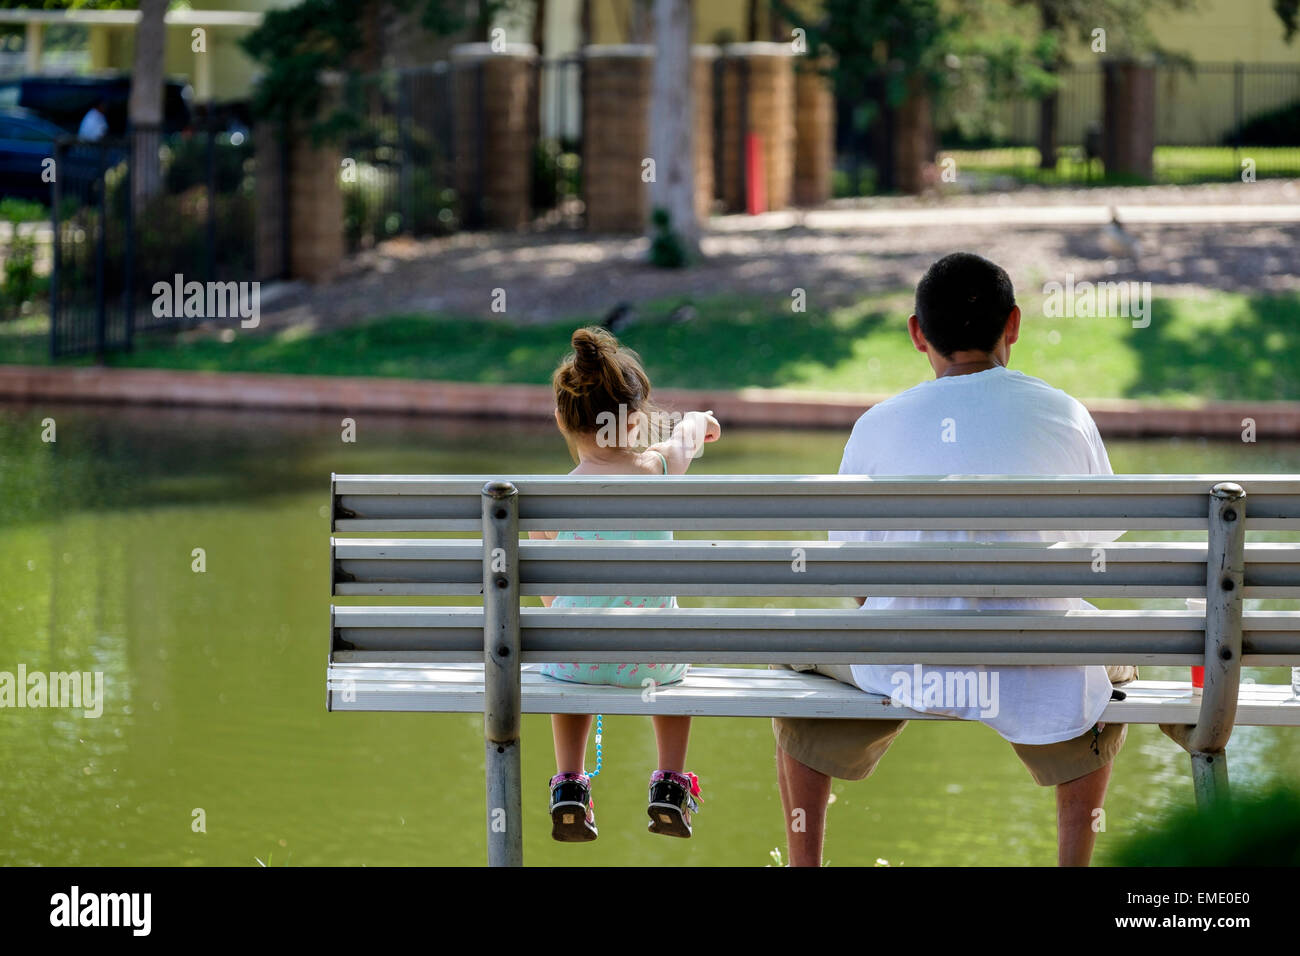 A Hispanic father and small daughter, sitting on a park bench, enjoy a spring day in a park. Oklahoma, USA. Stock Photo